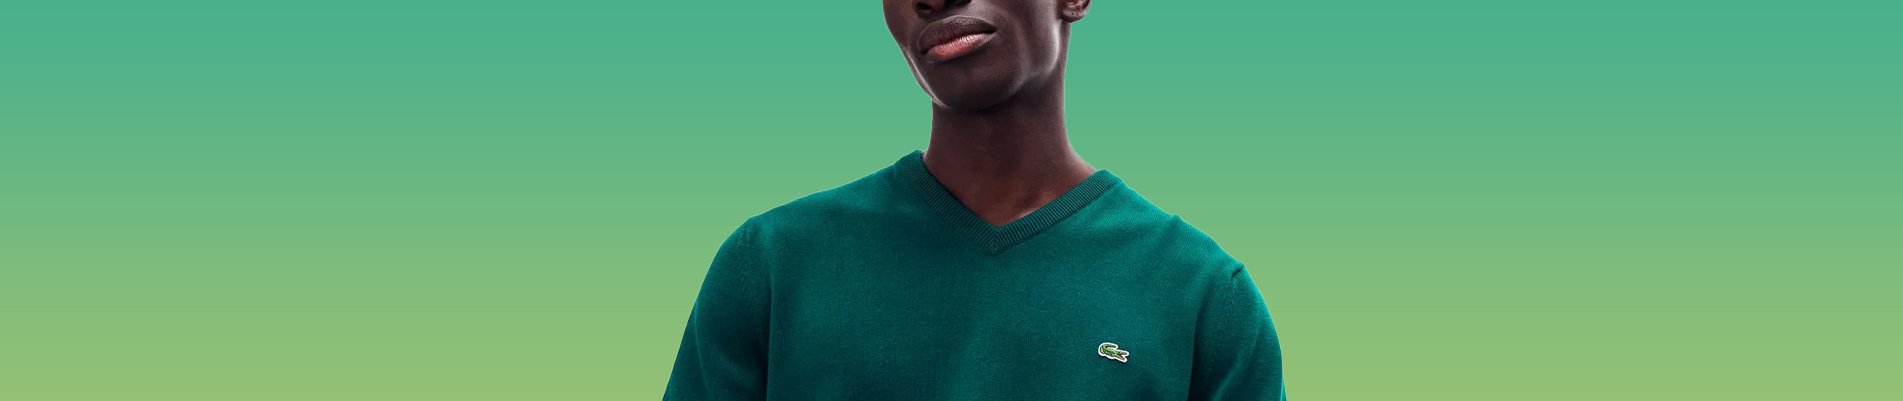 background-marca-lacoste